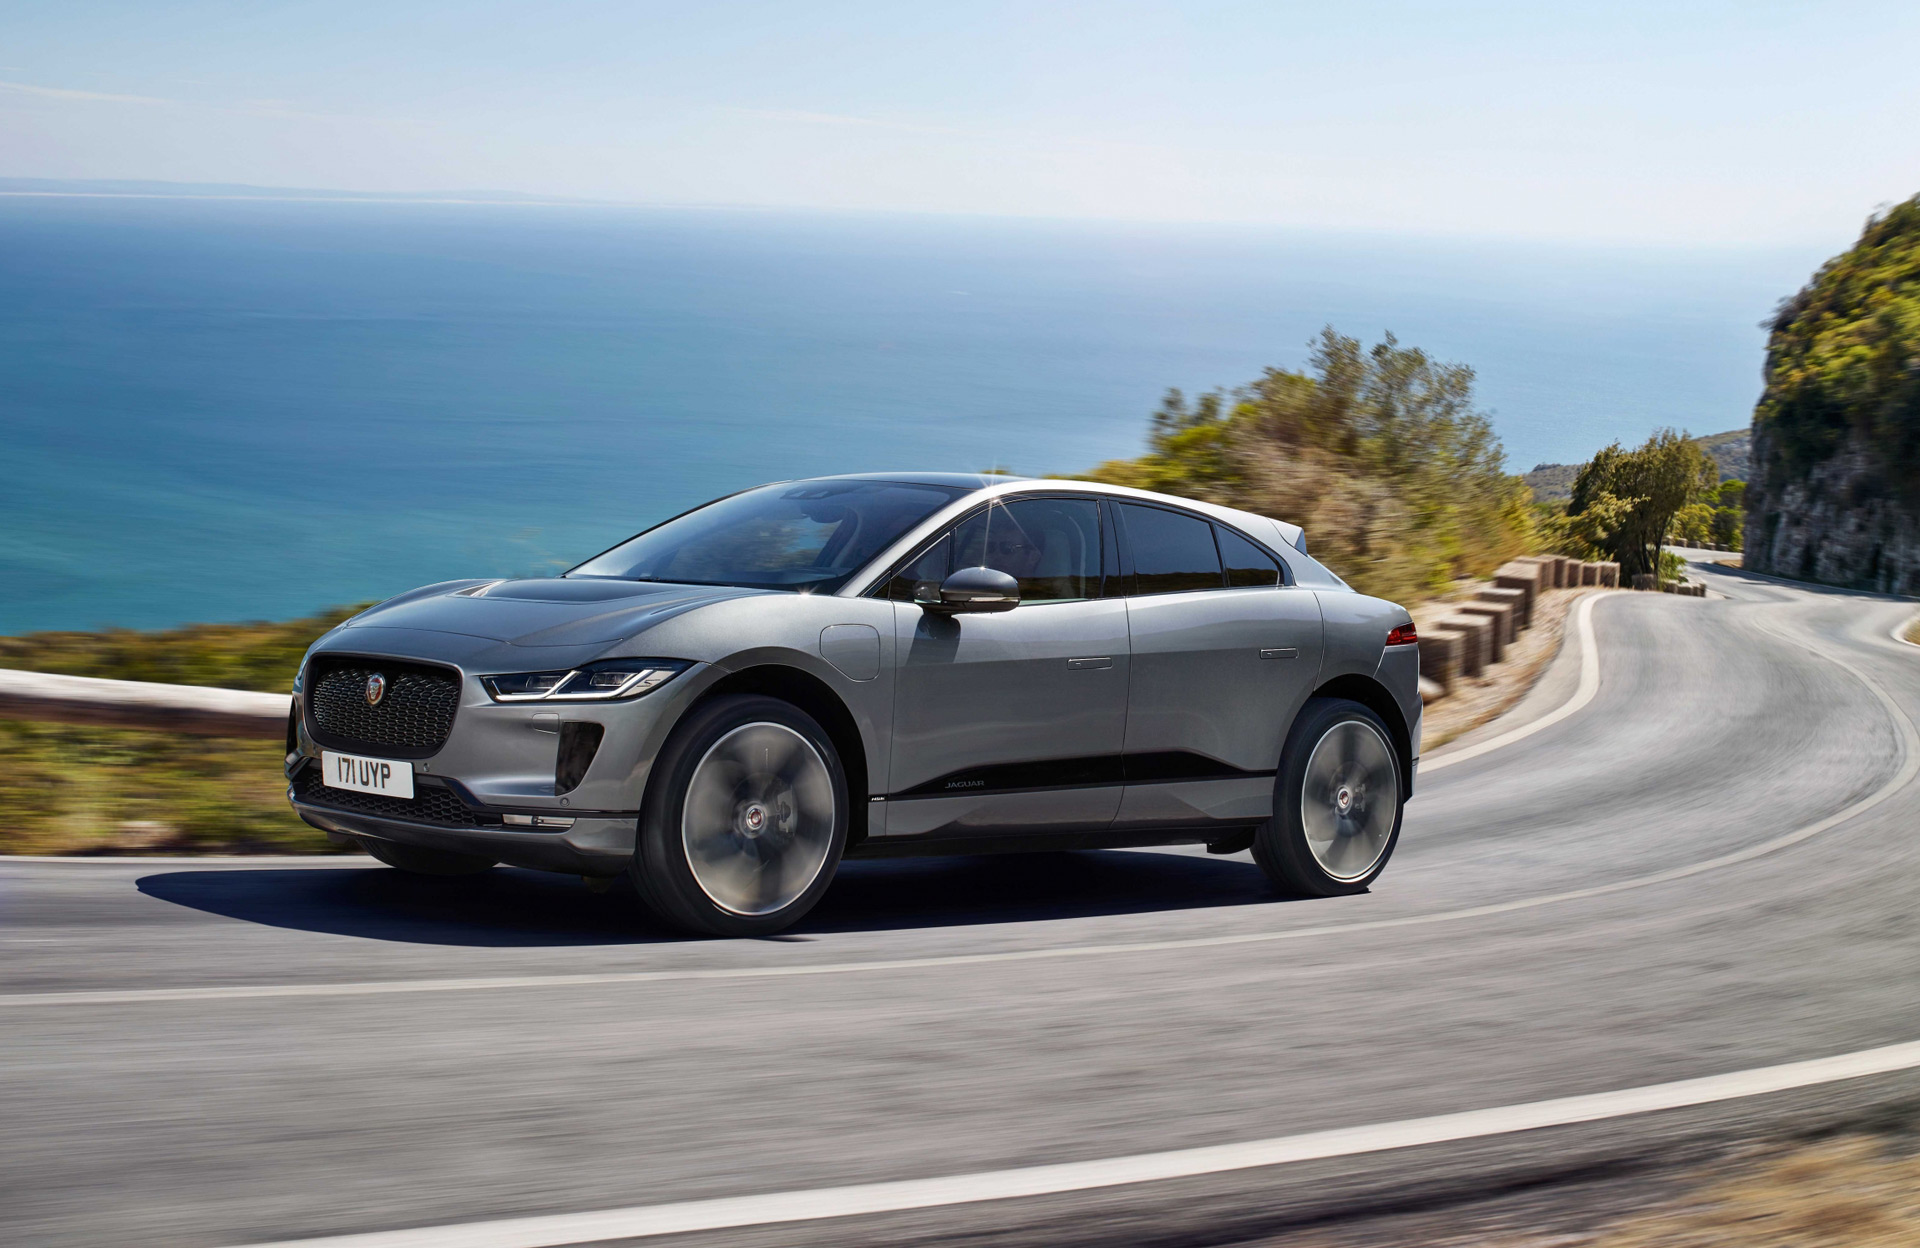 2021 Jaguar I-Pace electric SUV gets faster charging and ...